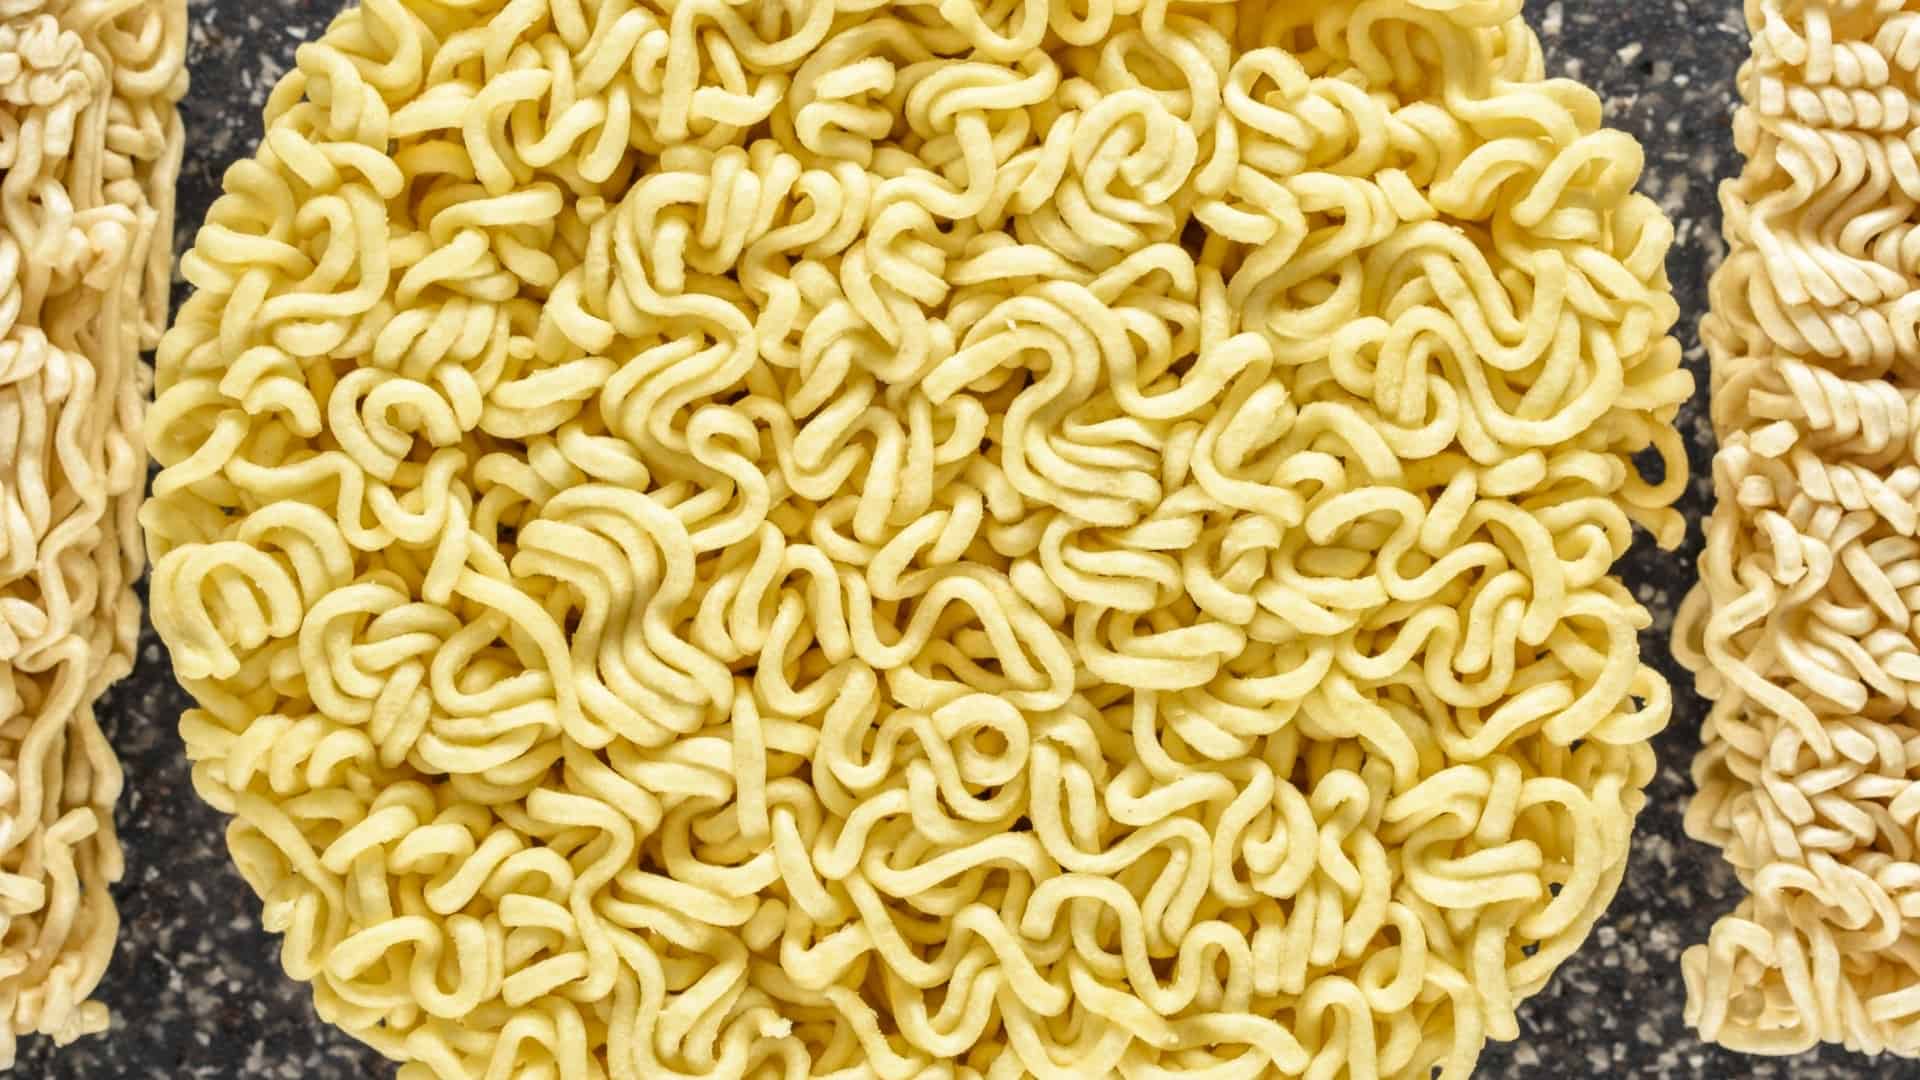 How much ramen do you need per person